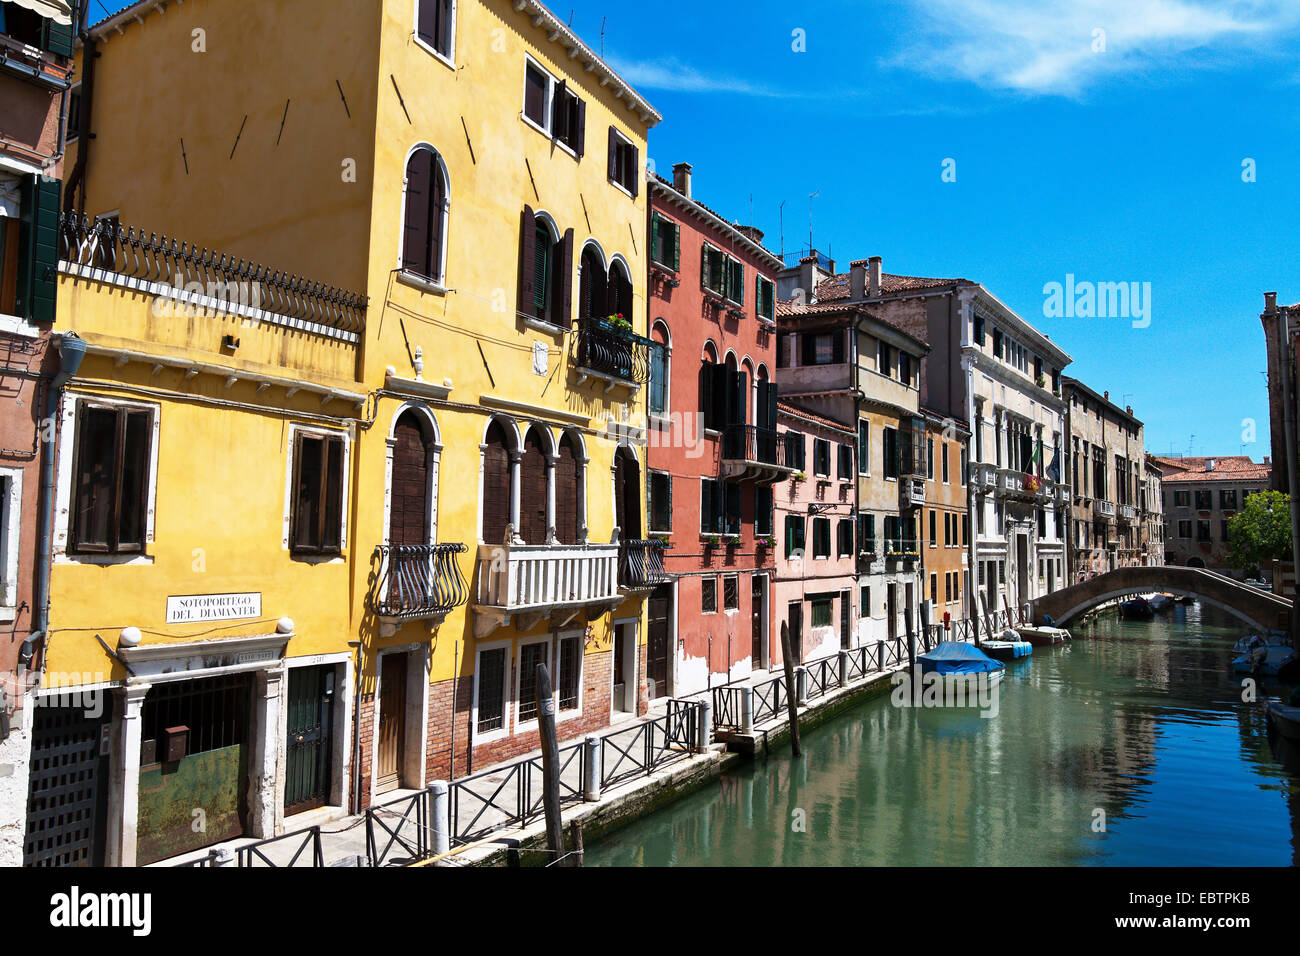 view along the row of houses at a canal, Italy, Venetia, Venice Stock Photo